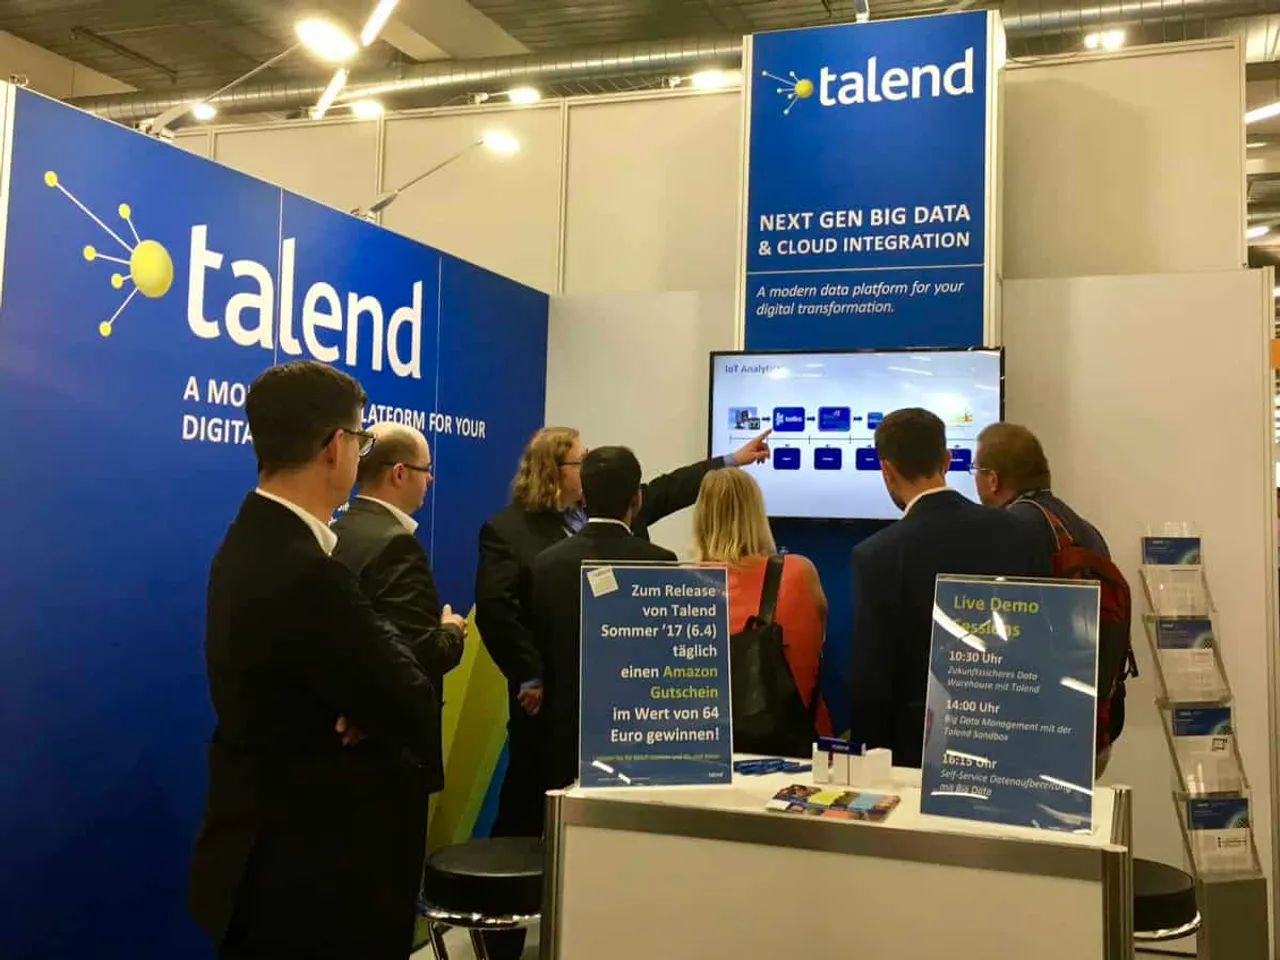 Talend Accelerates Growth by Opening New Office in India